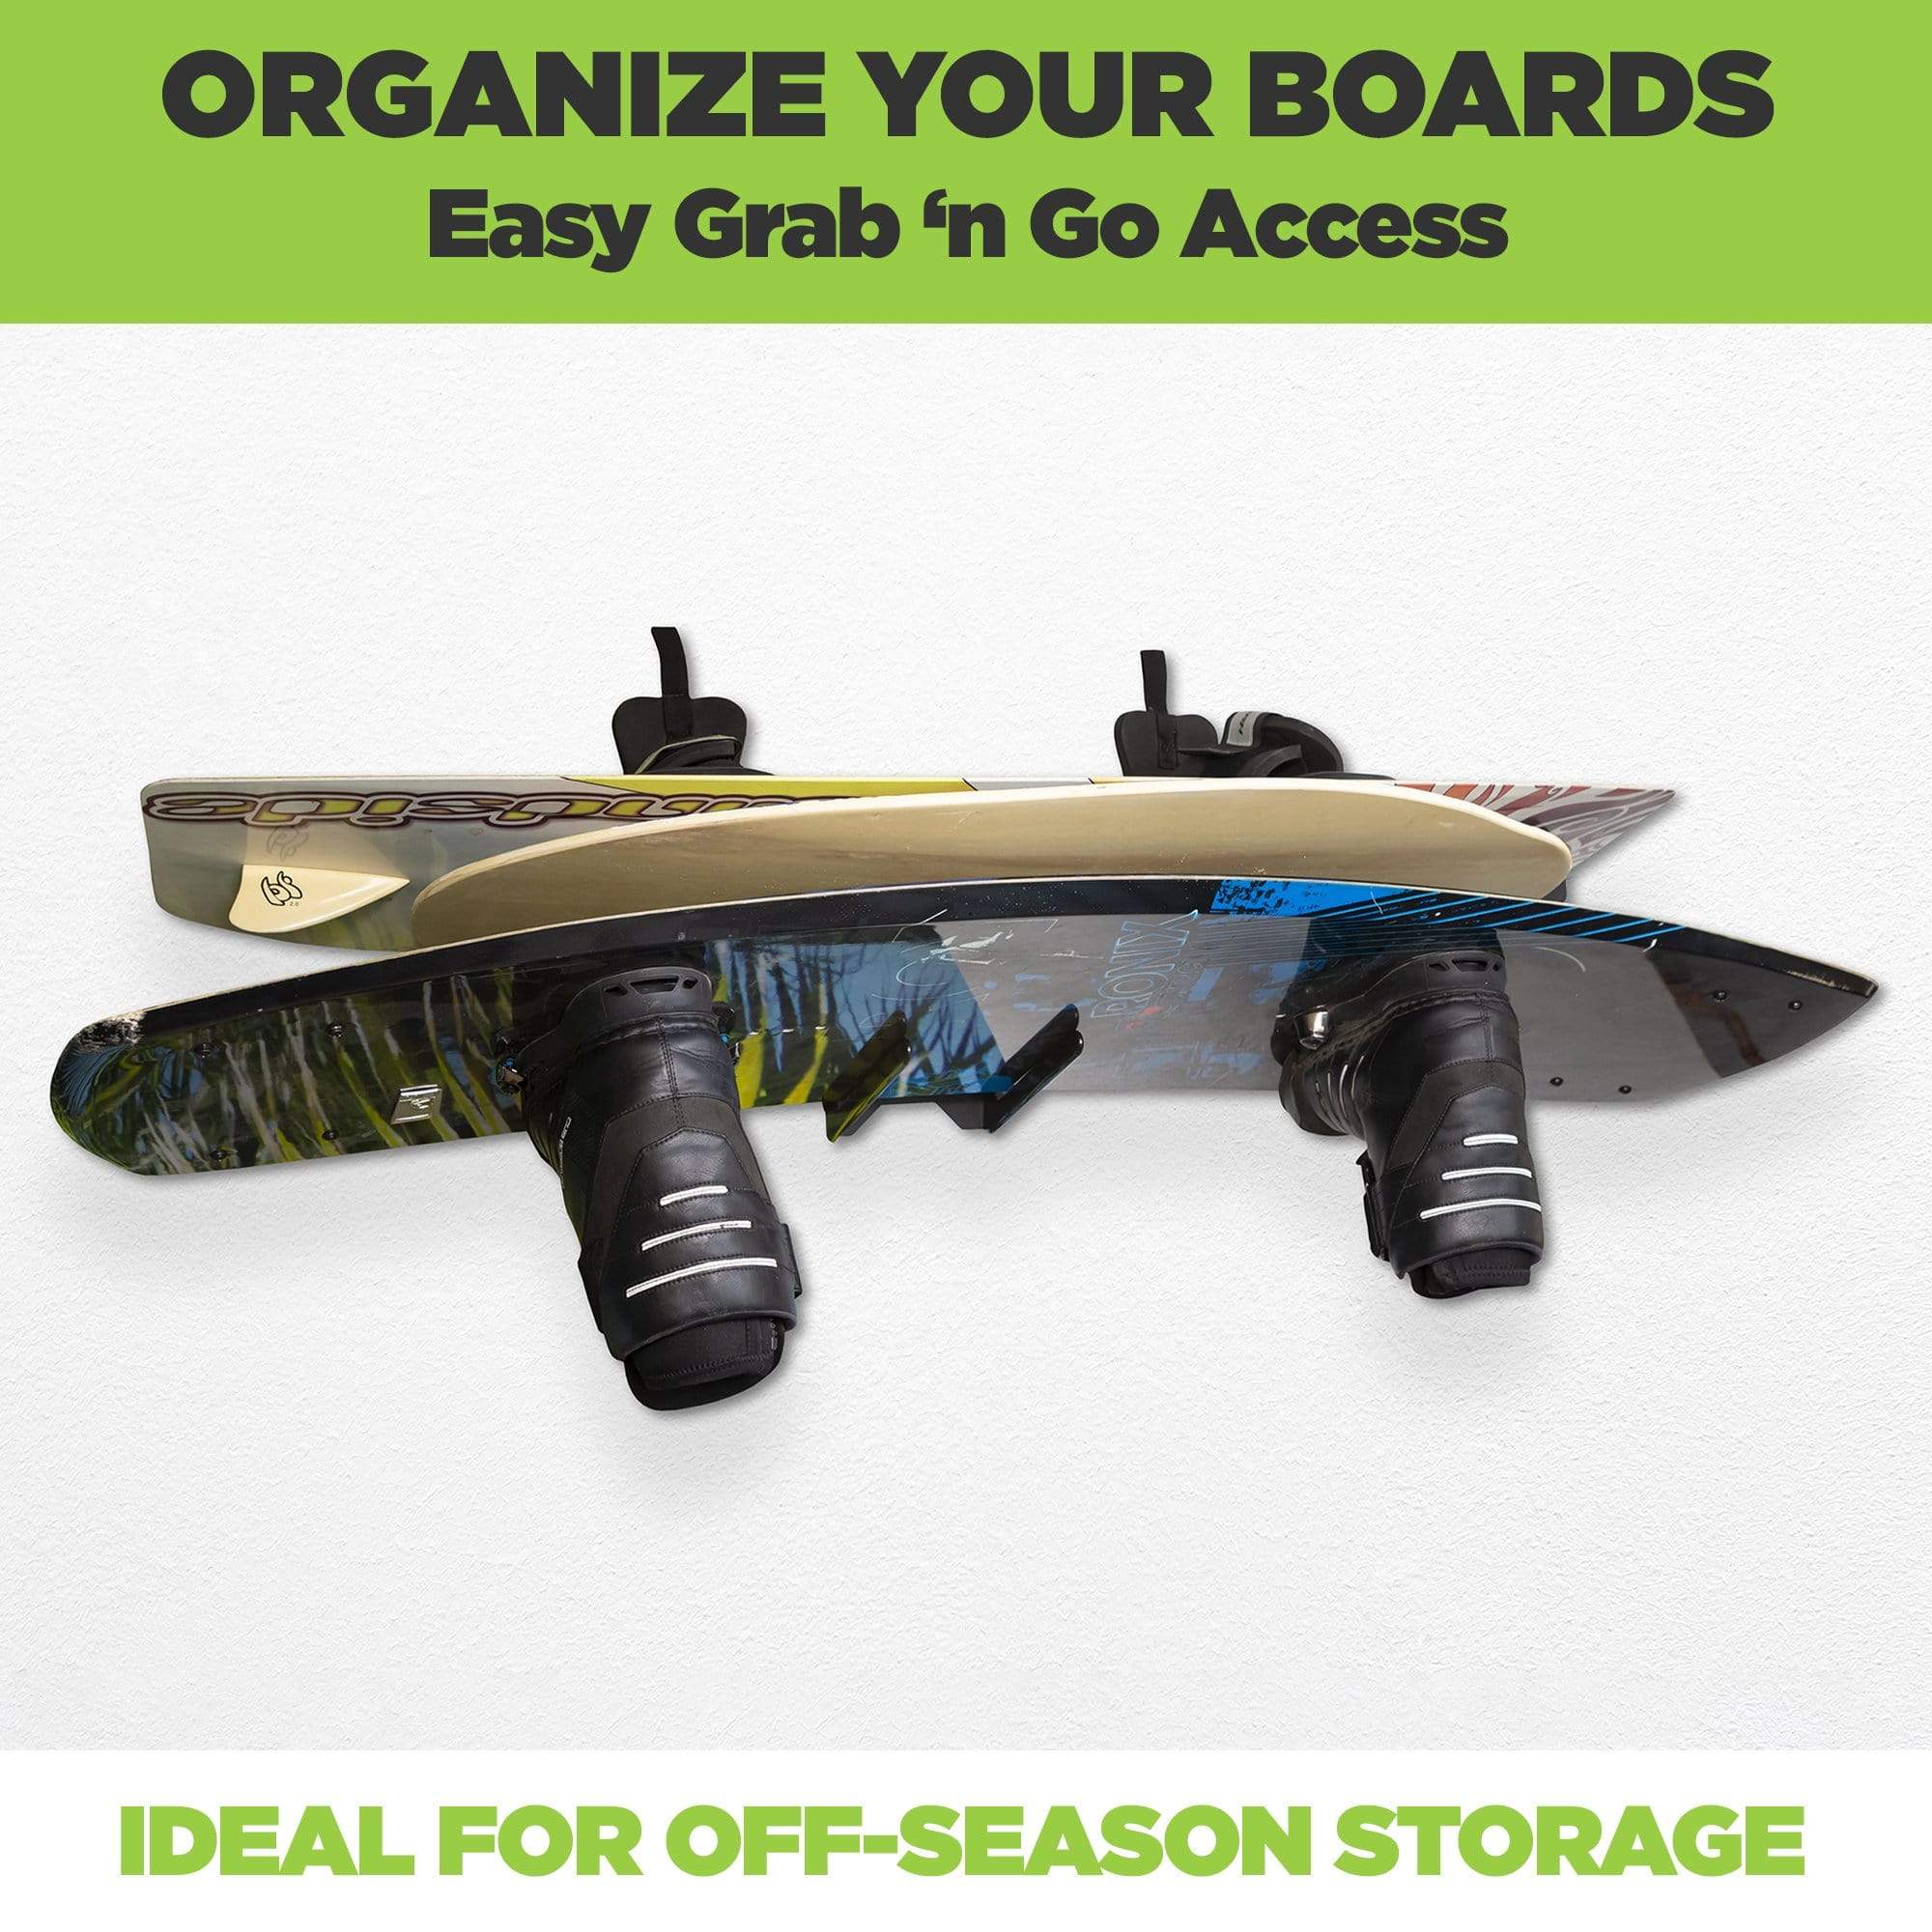 HIDEit MBoard is the ideal wakeboard rack for off-season storage. Organize and store your boards for easy grab and go access.